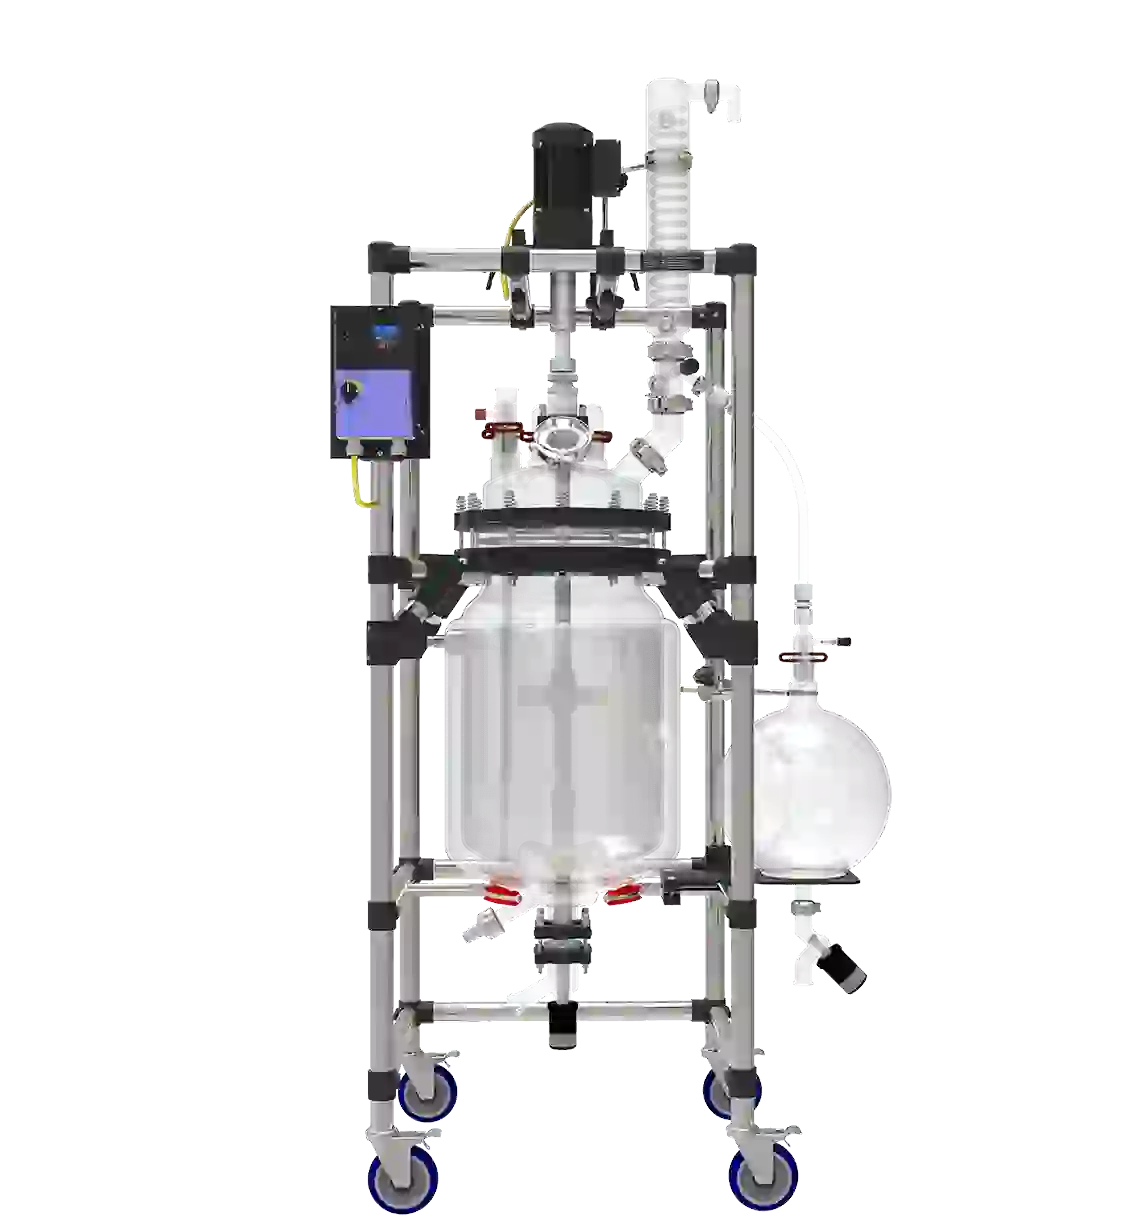 A detailed glass reactor system with glass and stainless steel components for specialized industrial and pharmaceutical use